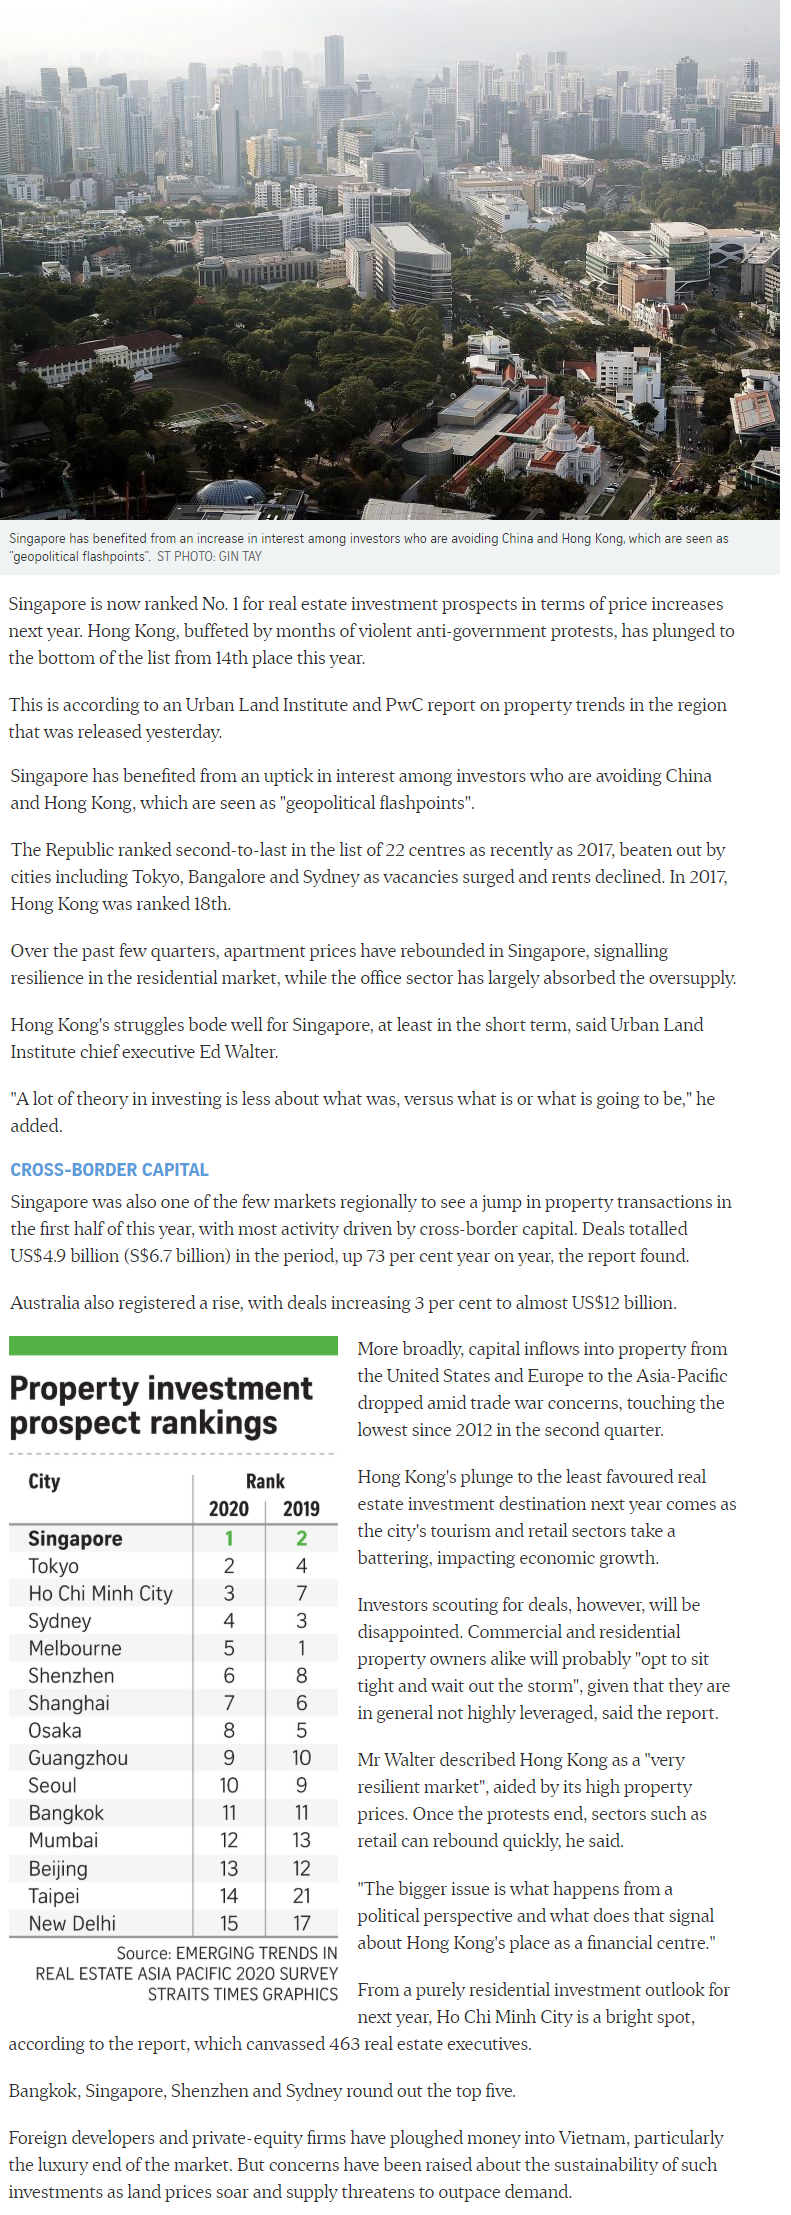 The Landmark - Singapore Tops Region For Property Investment Prospects